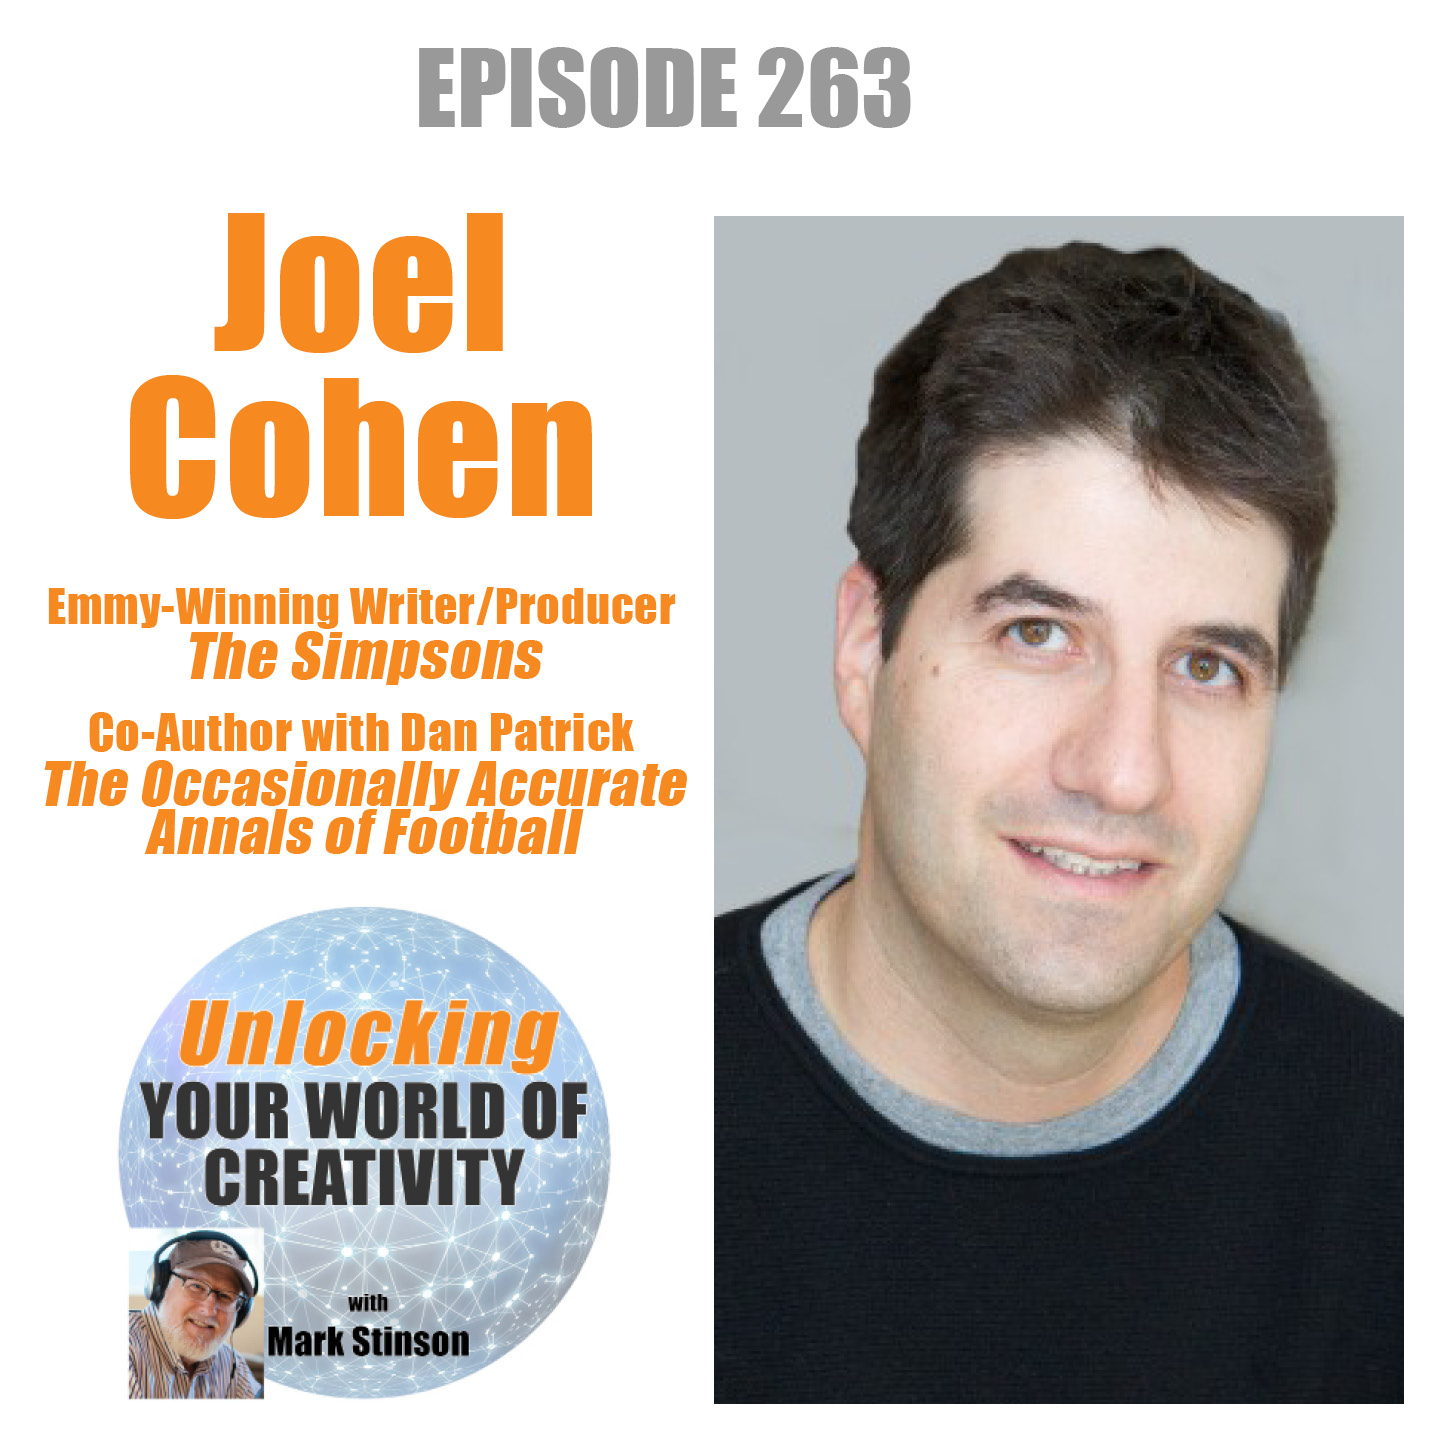 Joel Cohen, Emmy-winning writer/producer “The Simpsons.” and co-author “The Occasionally Accurate Annals of Football”